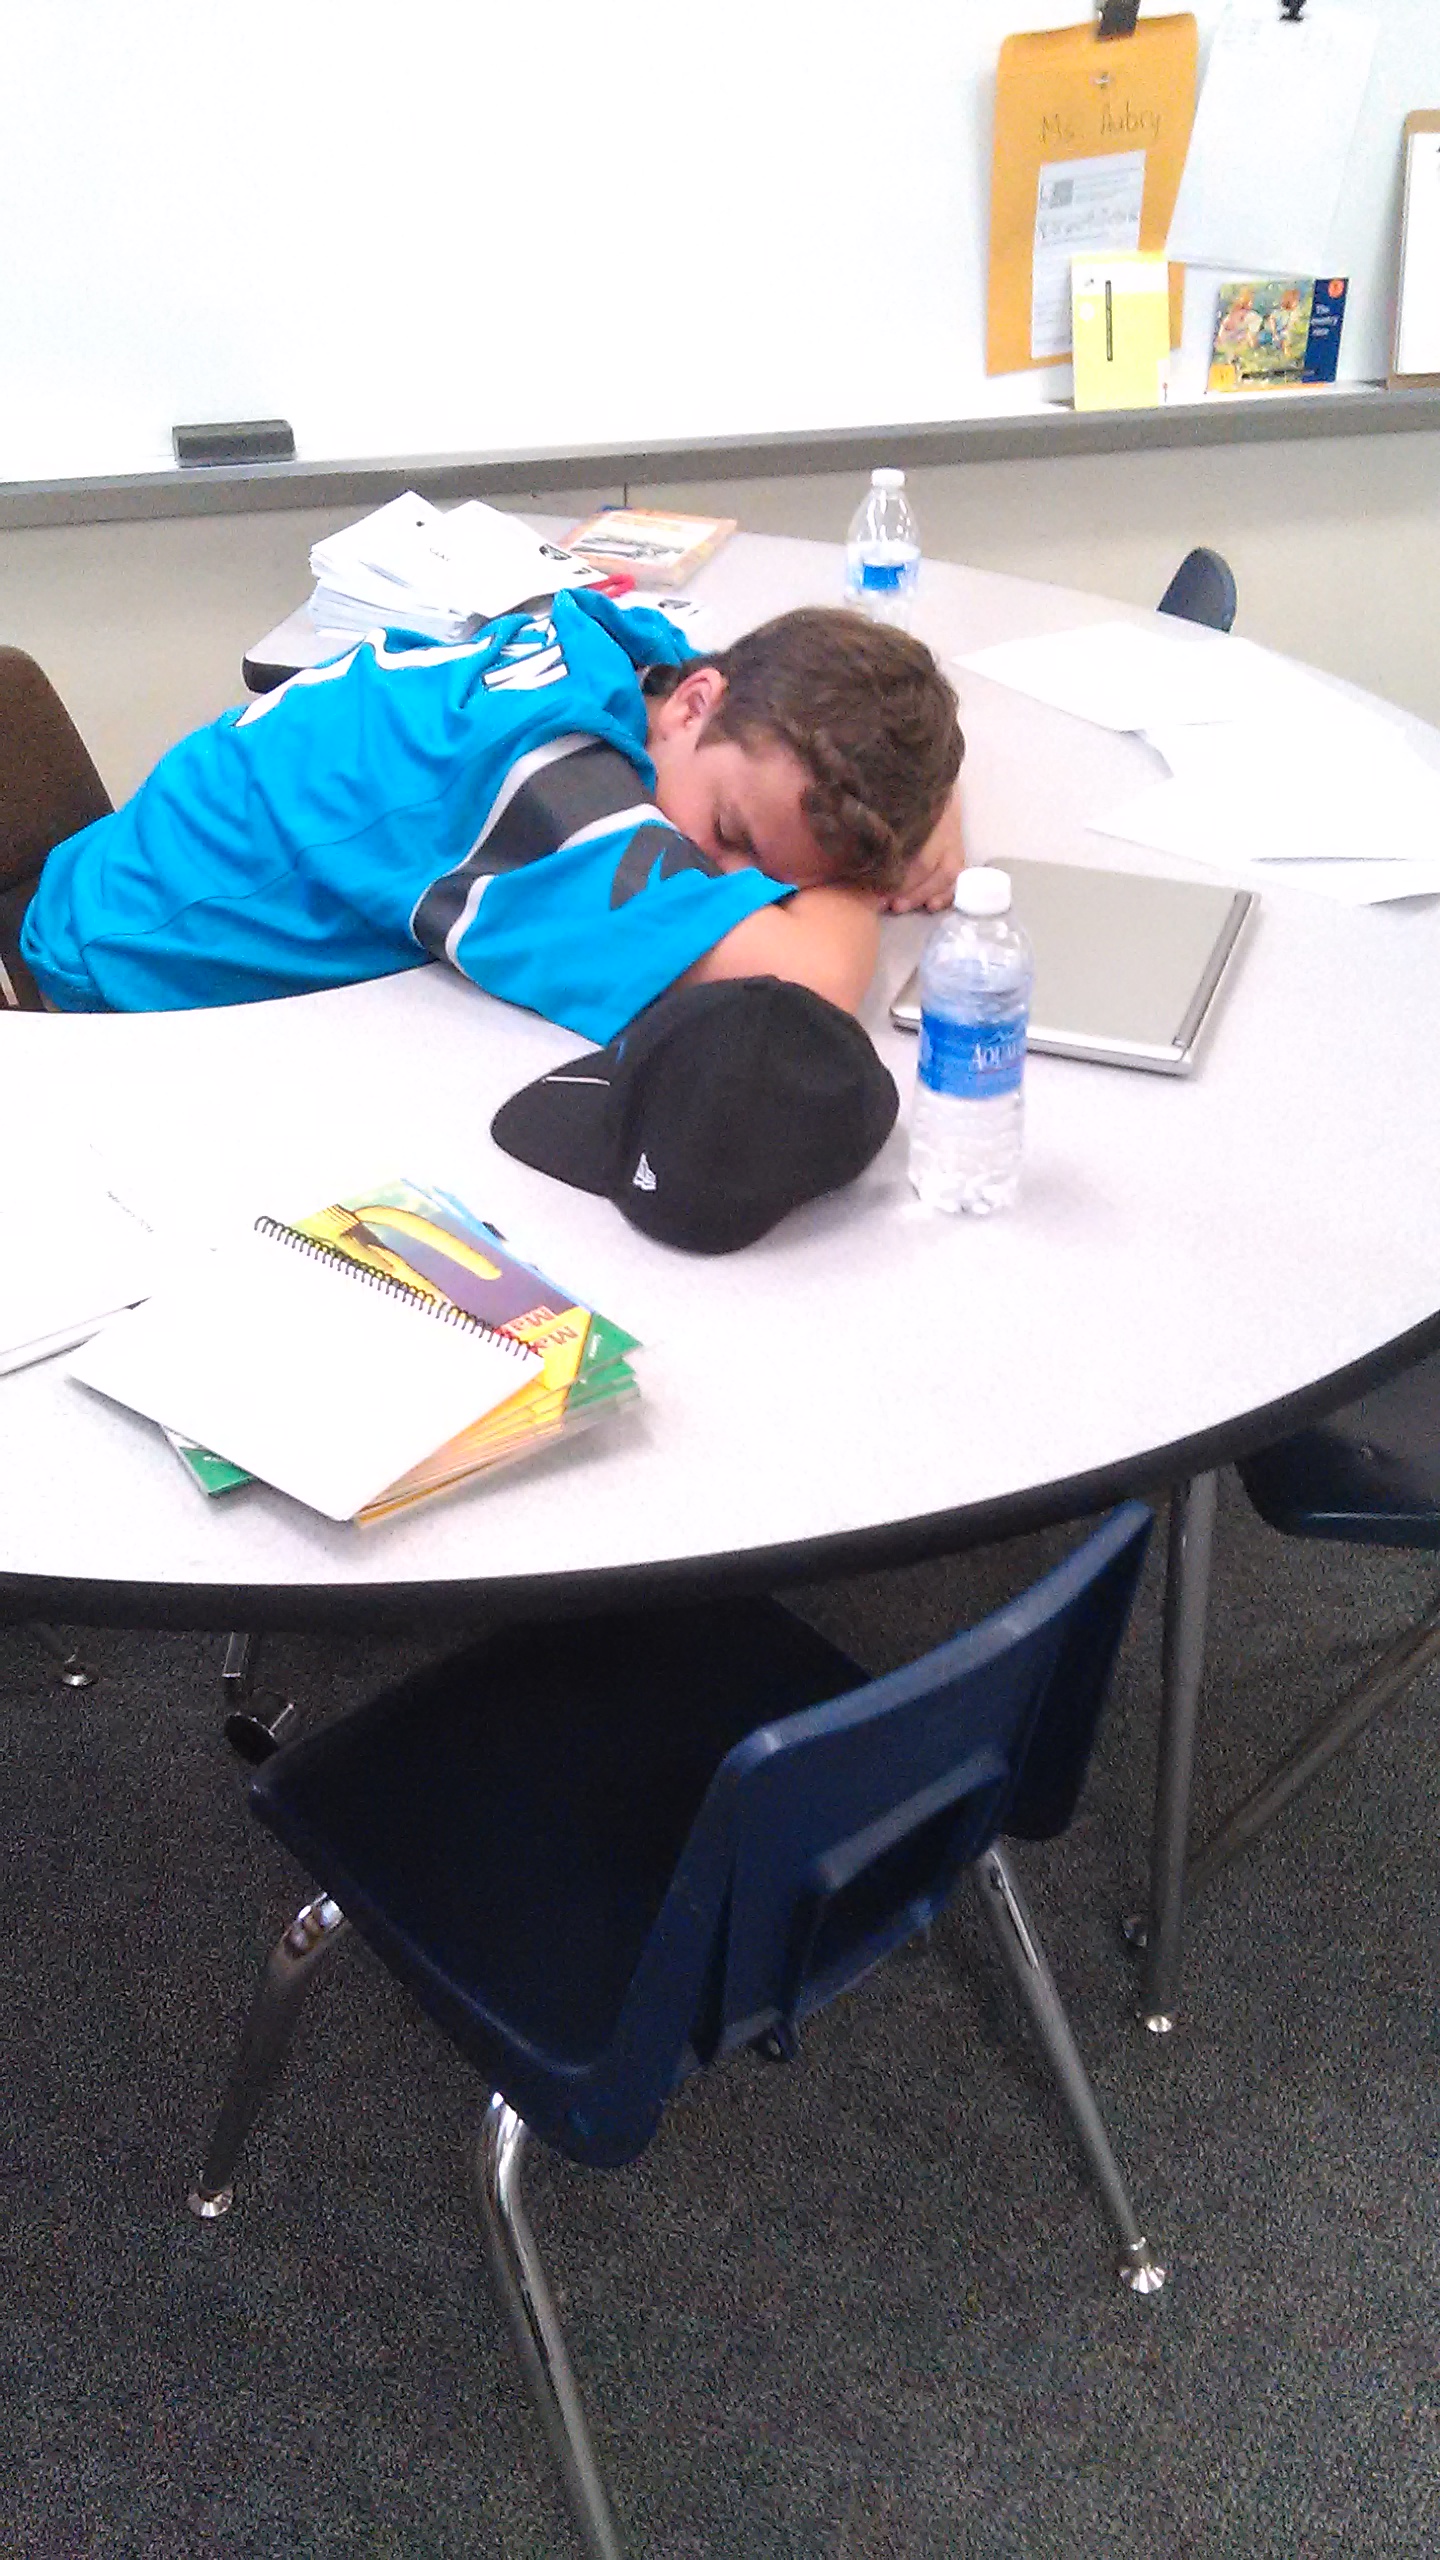  A student at a California high school with a 7:15 a.m. start time sleeps in class. (Courtesy of StartSchoolLater) 